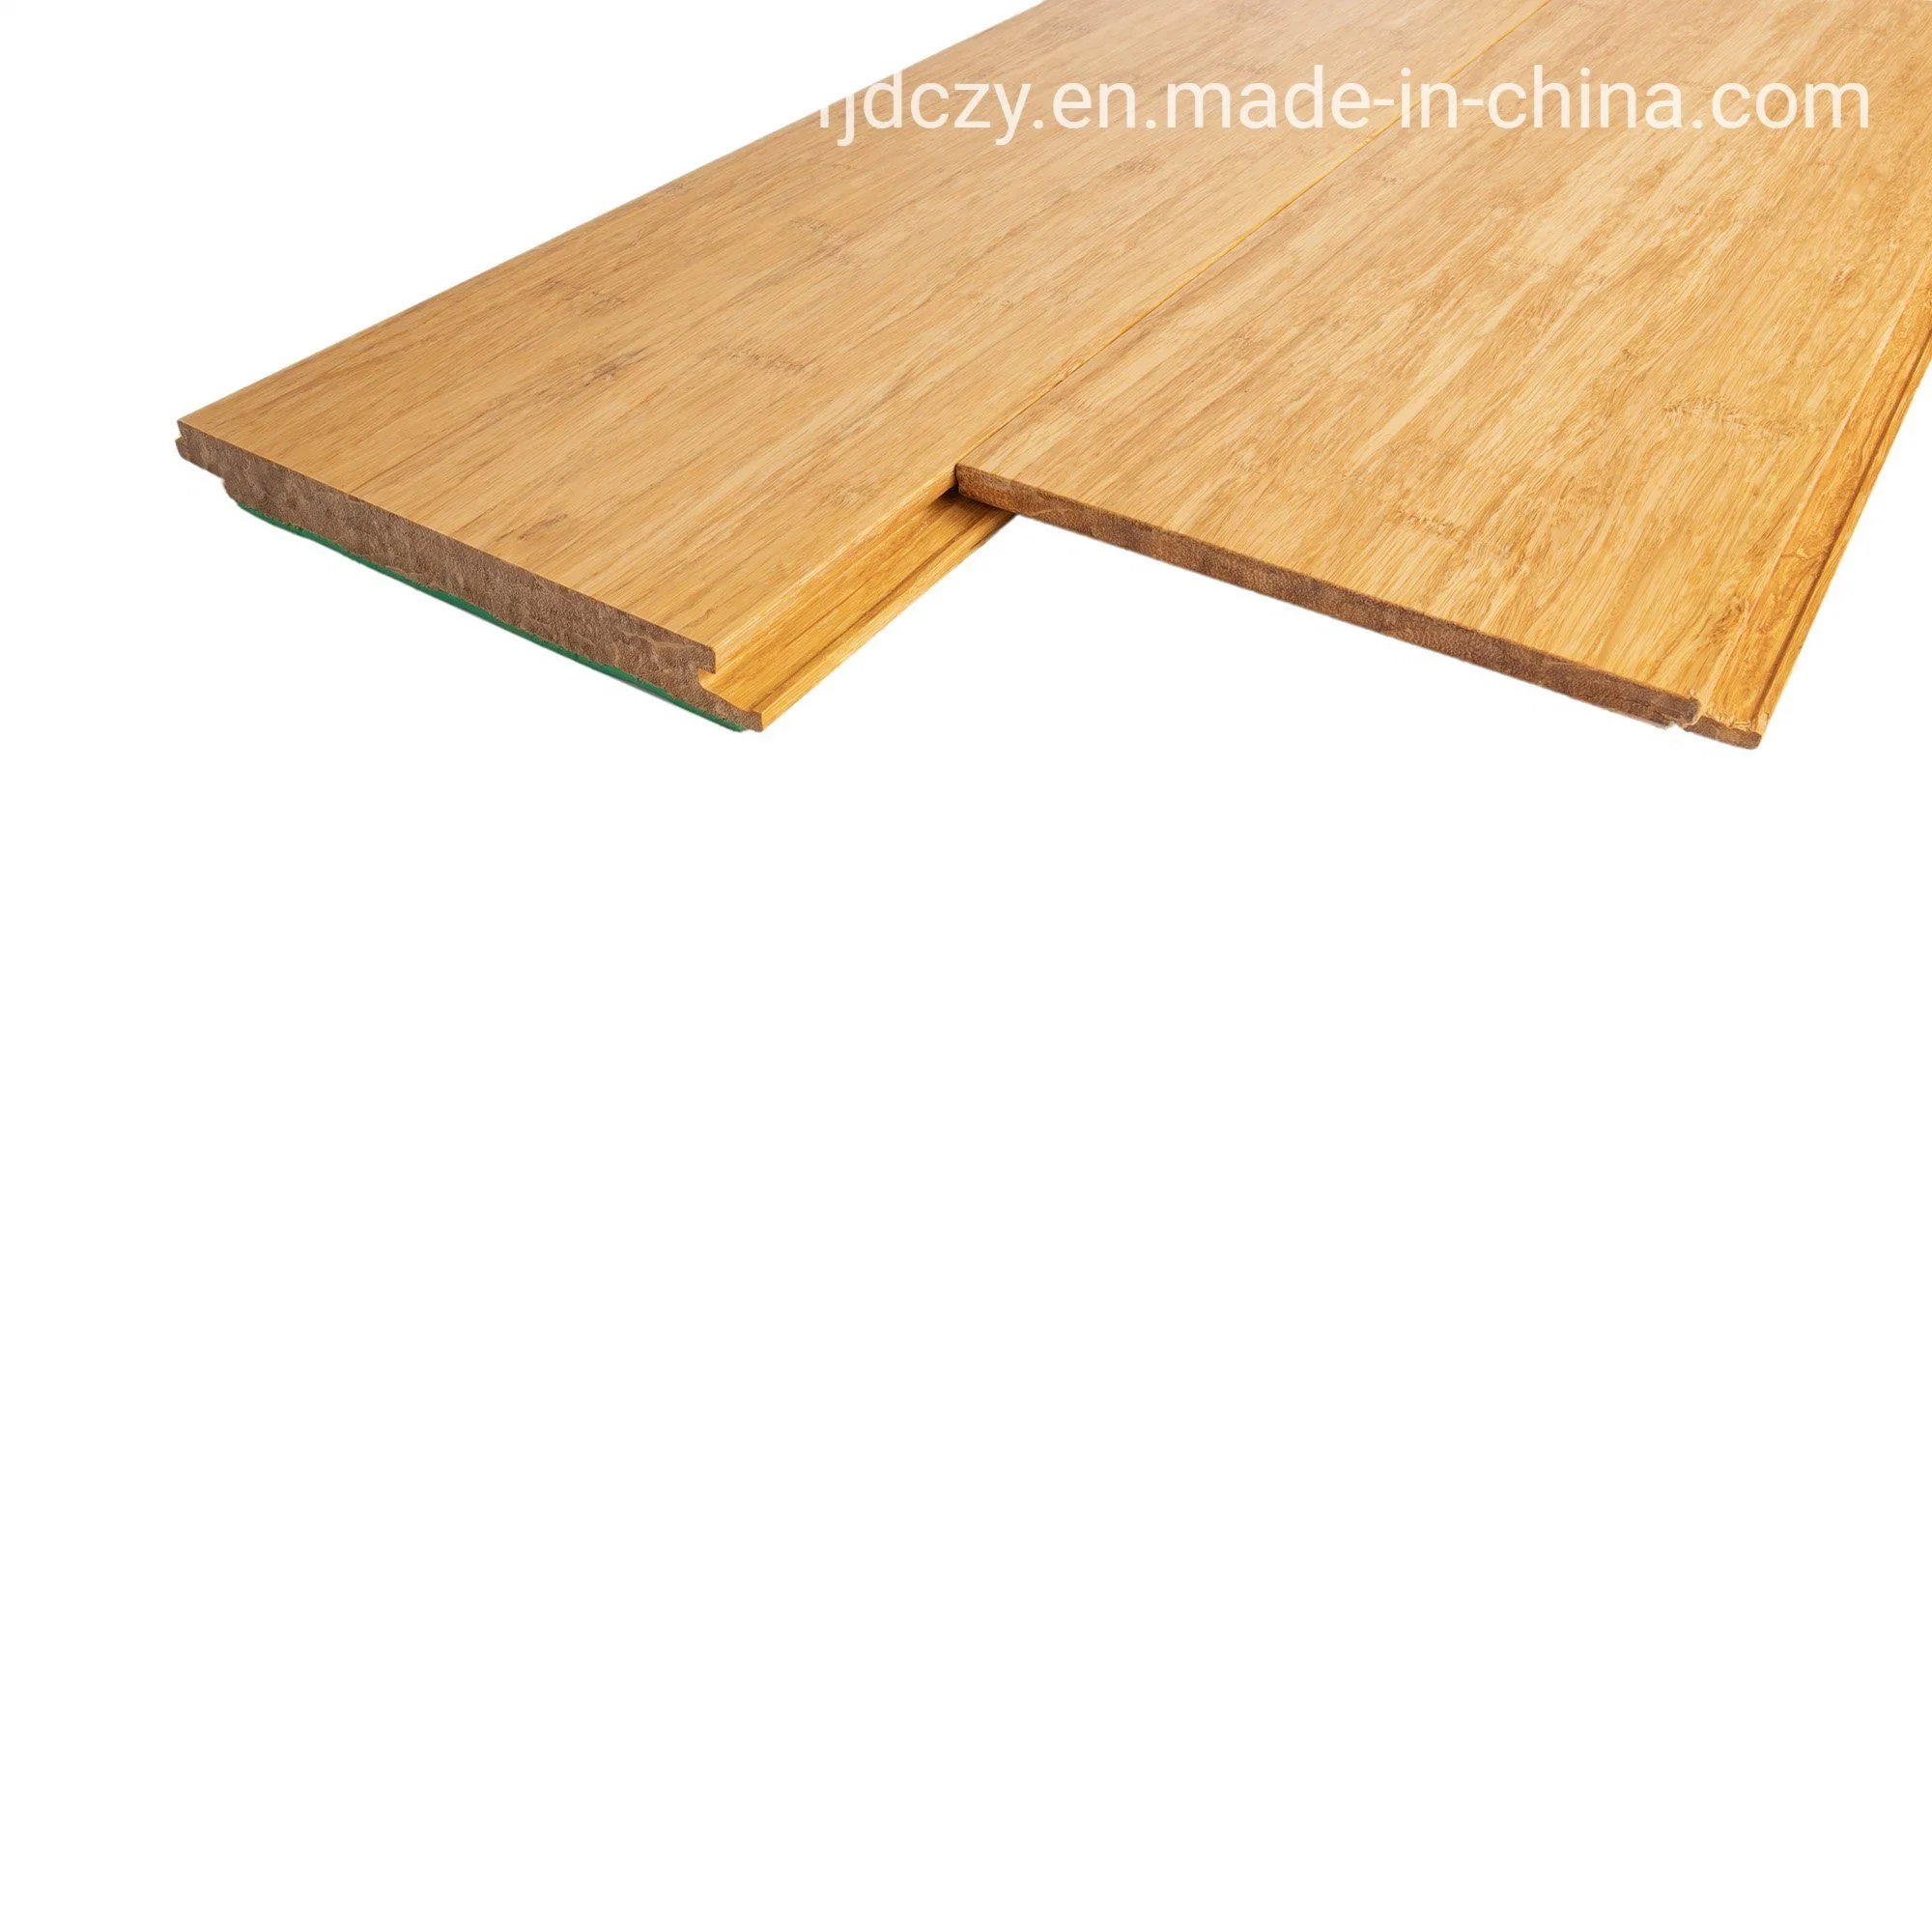 Eco-Friendly E0 Wholesales Bamboo Flooring Supplier&Manufacturer Soundproof Home Decoration Indoor Bamboo Floor/Flooring